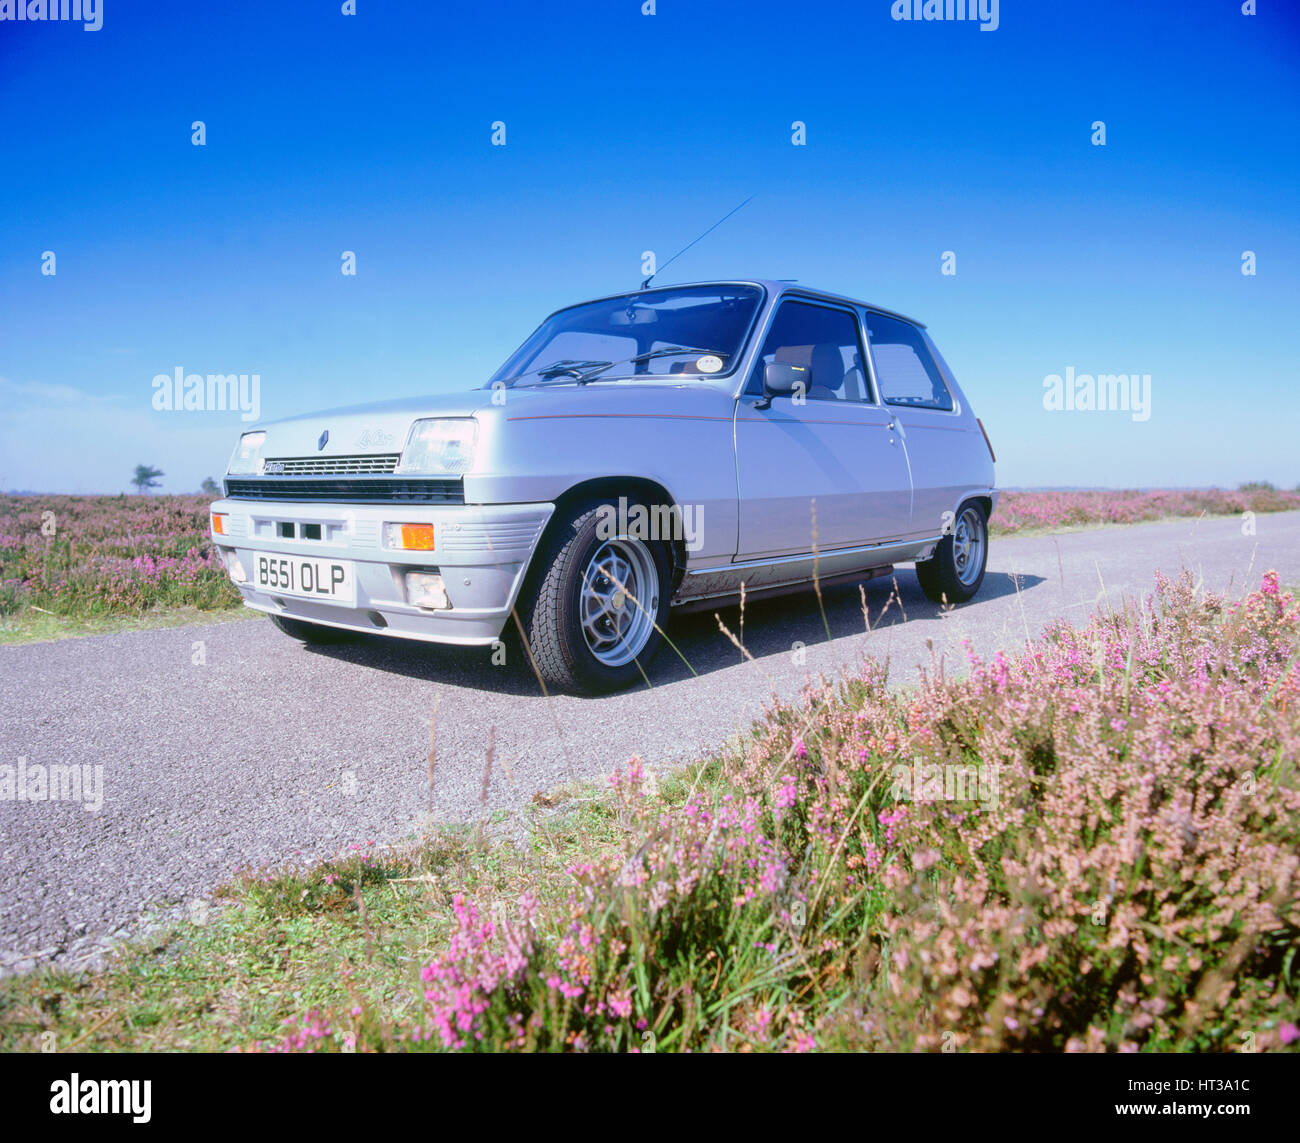 1985 Renault 5 Le Car Turbo. Artist: Unknown. Stock Photo